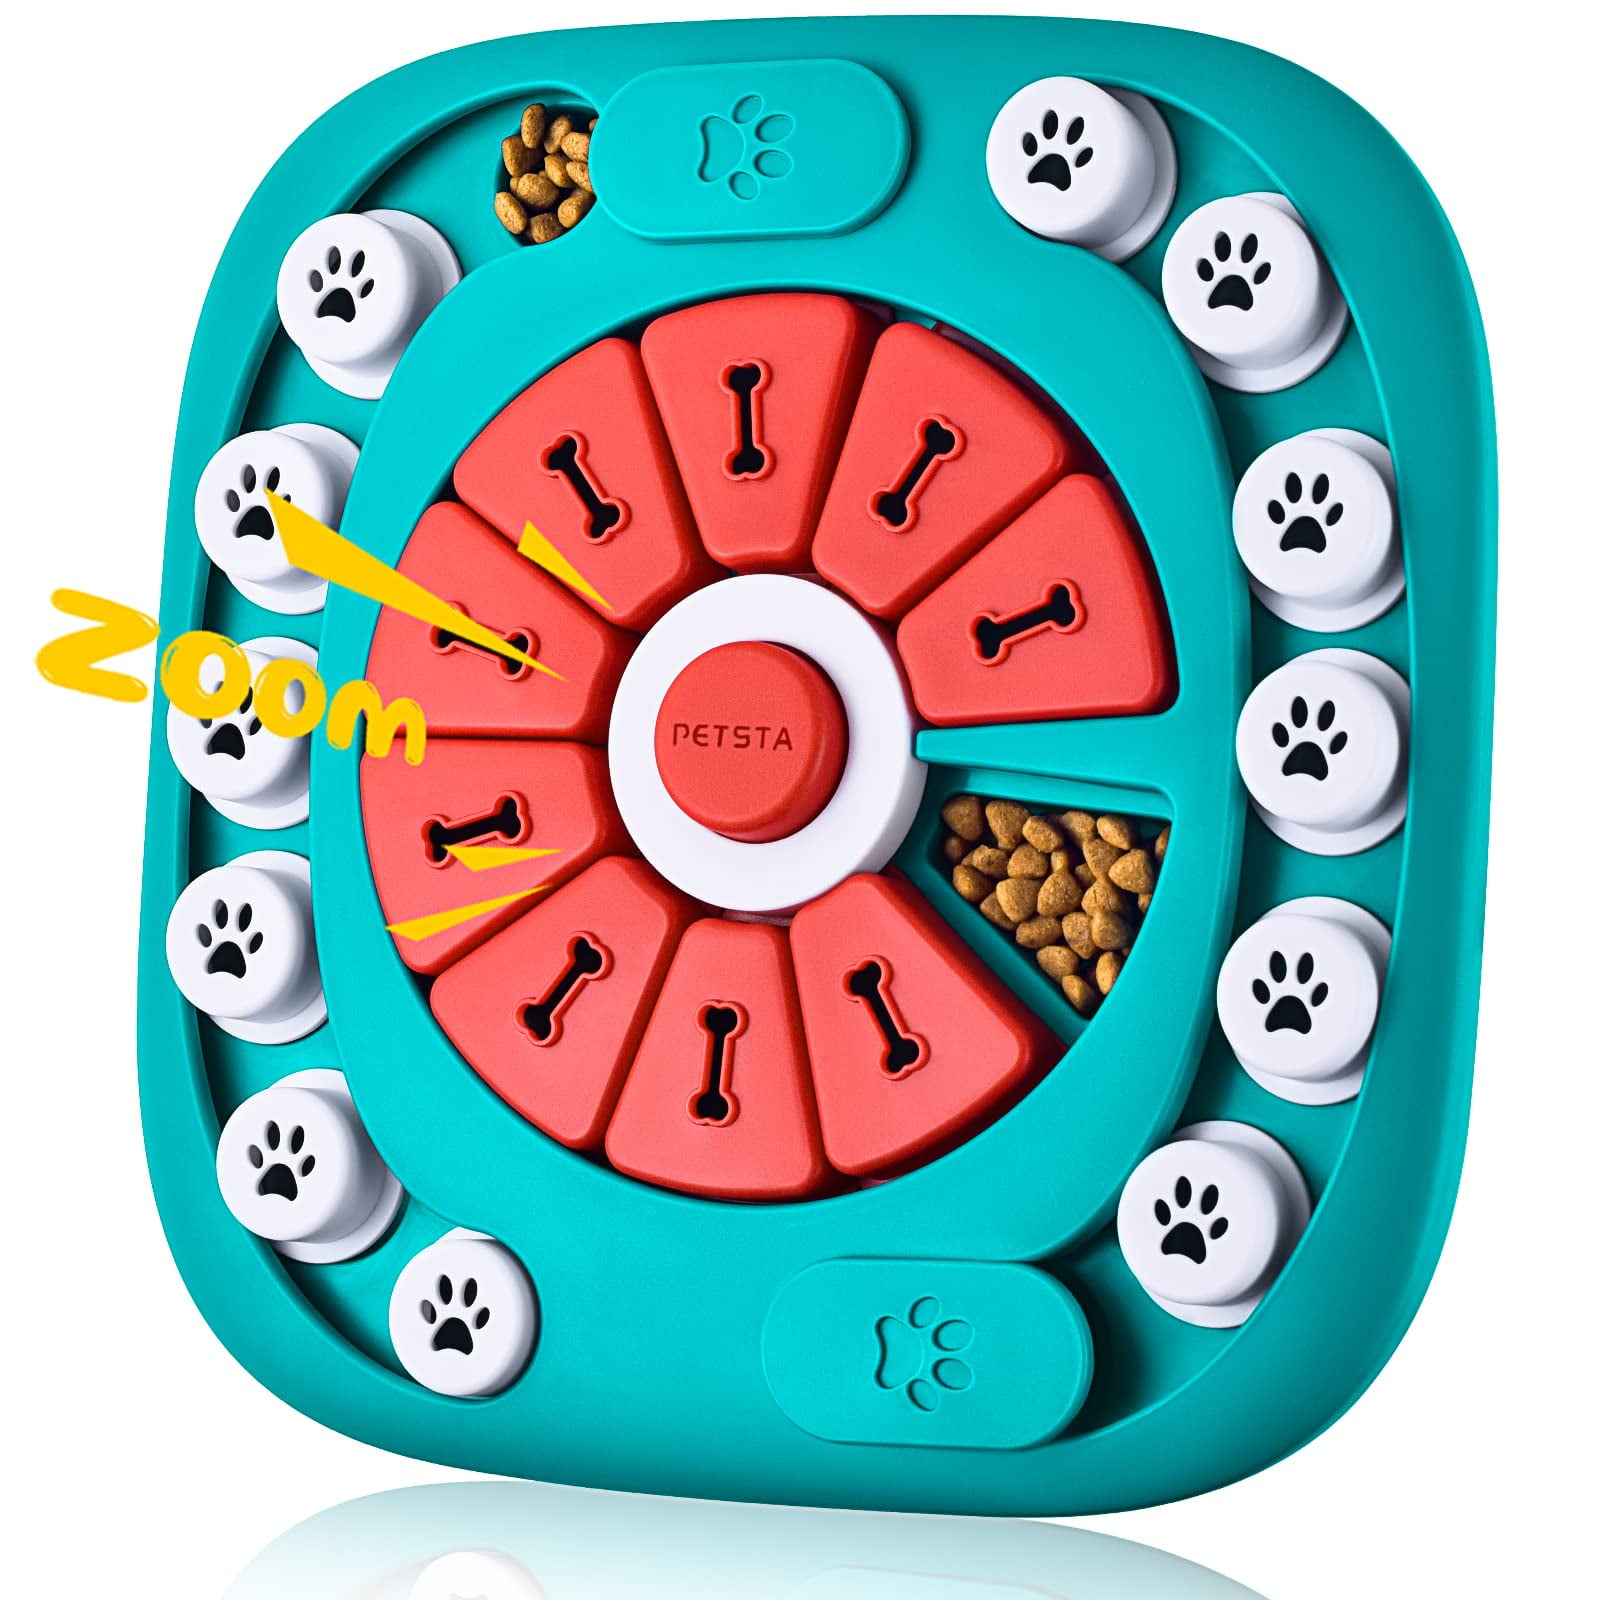 Dog Puzzle Toys Interactive Toy for Puppy IQ Stimulation &Treat Training  Games Treat Dispenser for Smart Dogs, Puppy &Cats Fun Feeding (Level 1-3)…